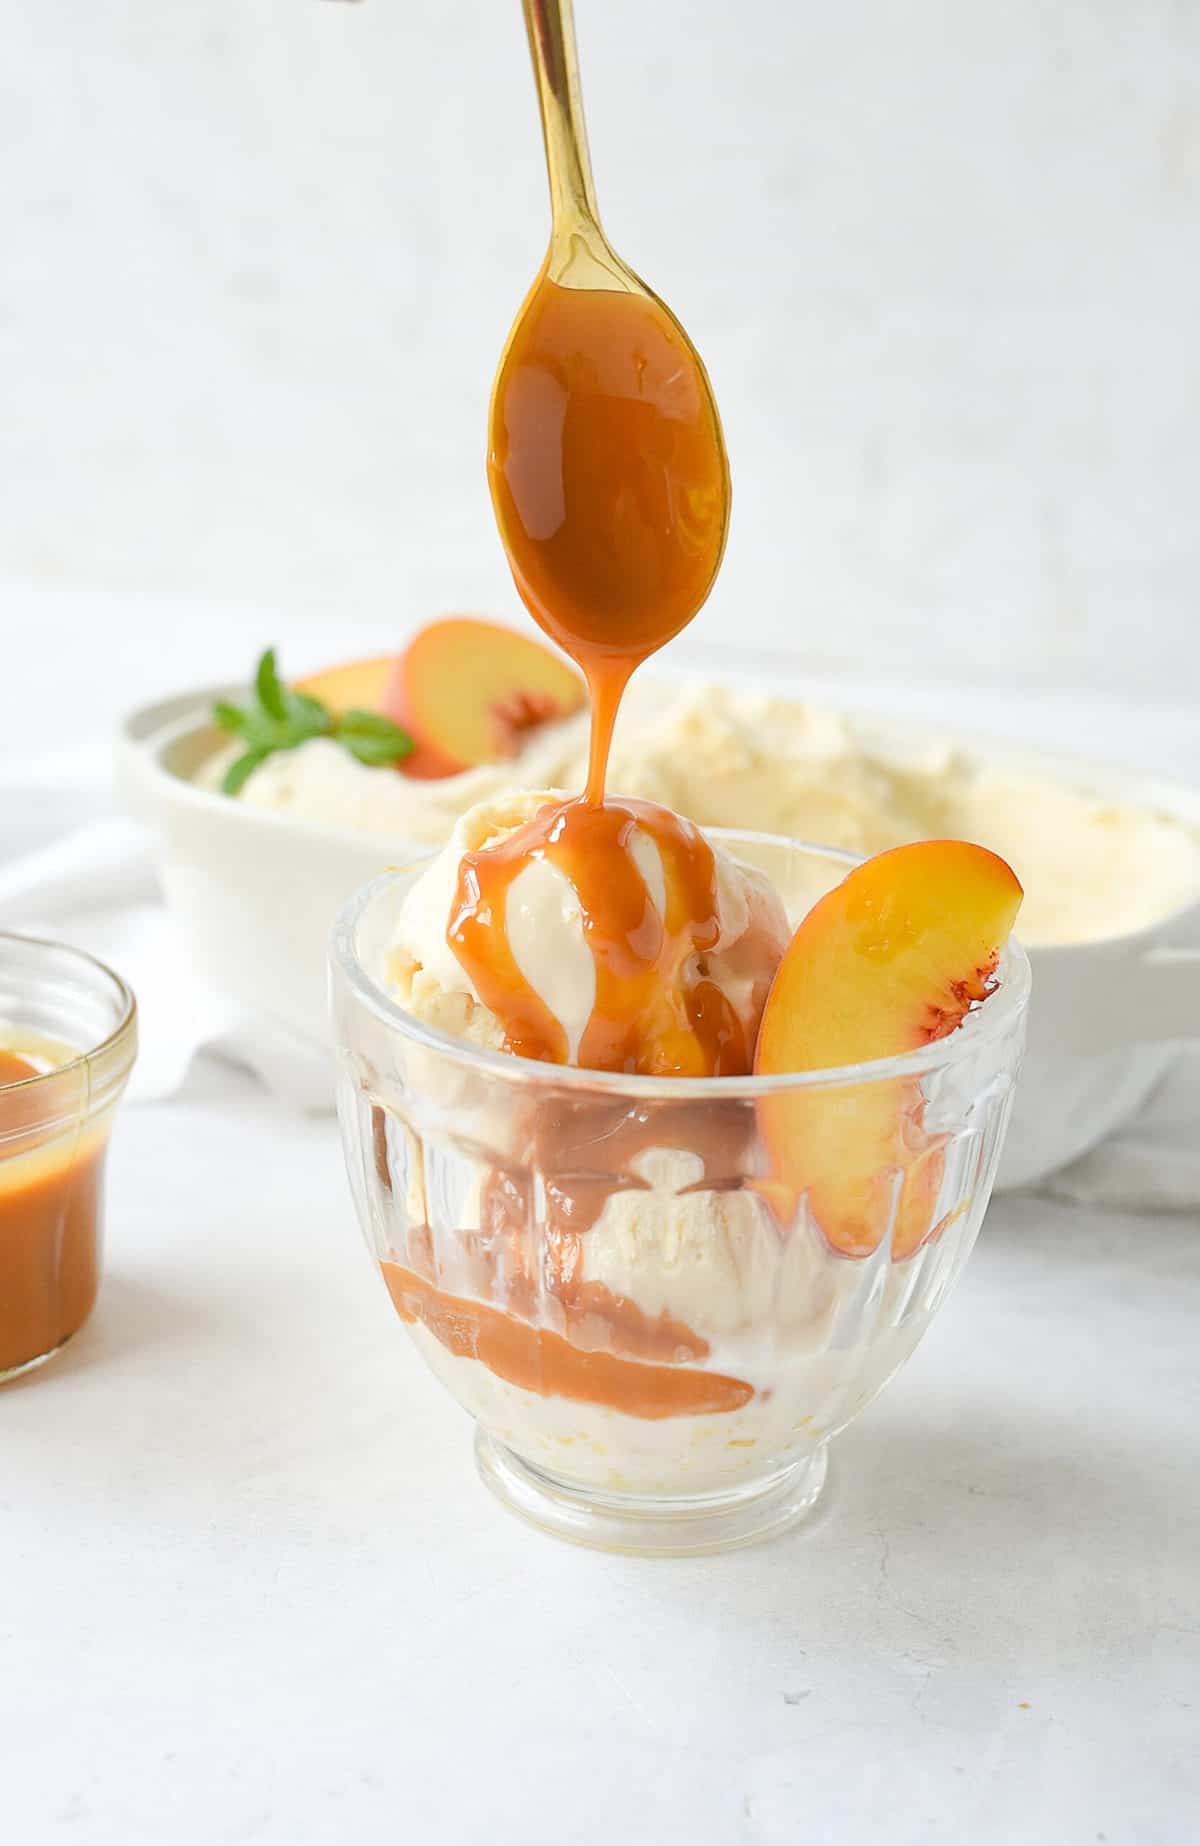 drizzling peach ice cream with caramel sauce